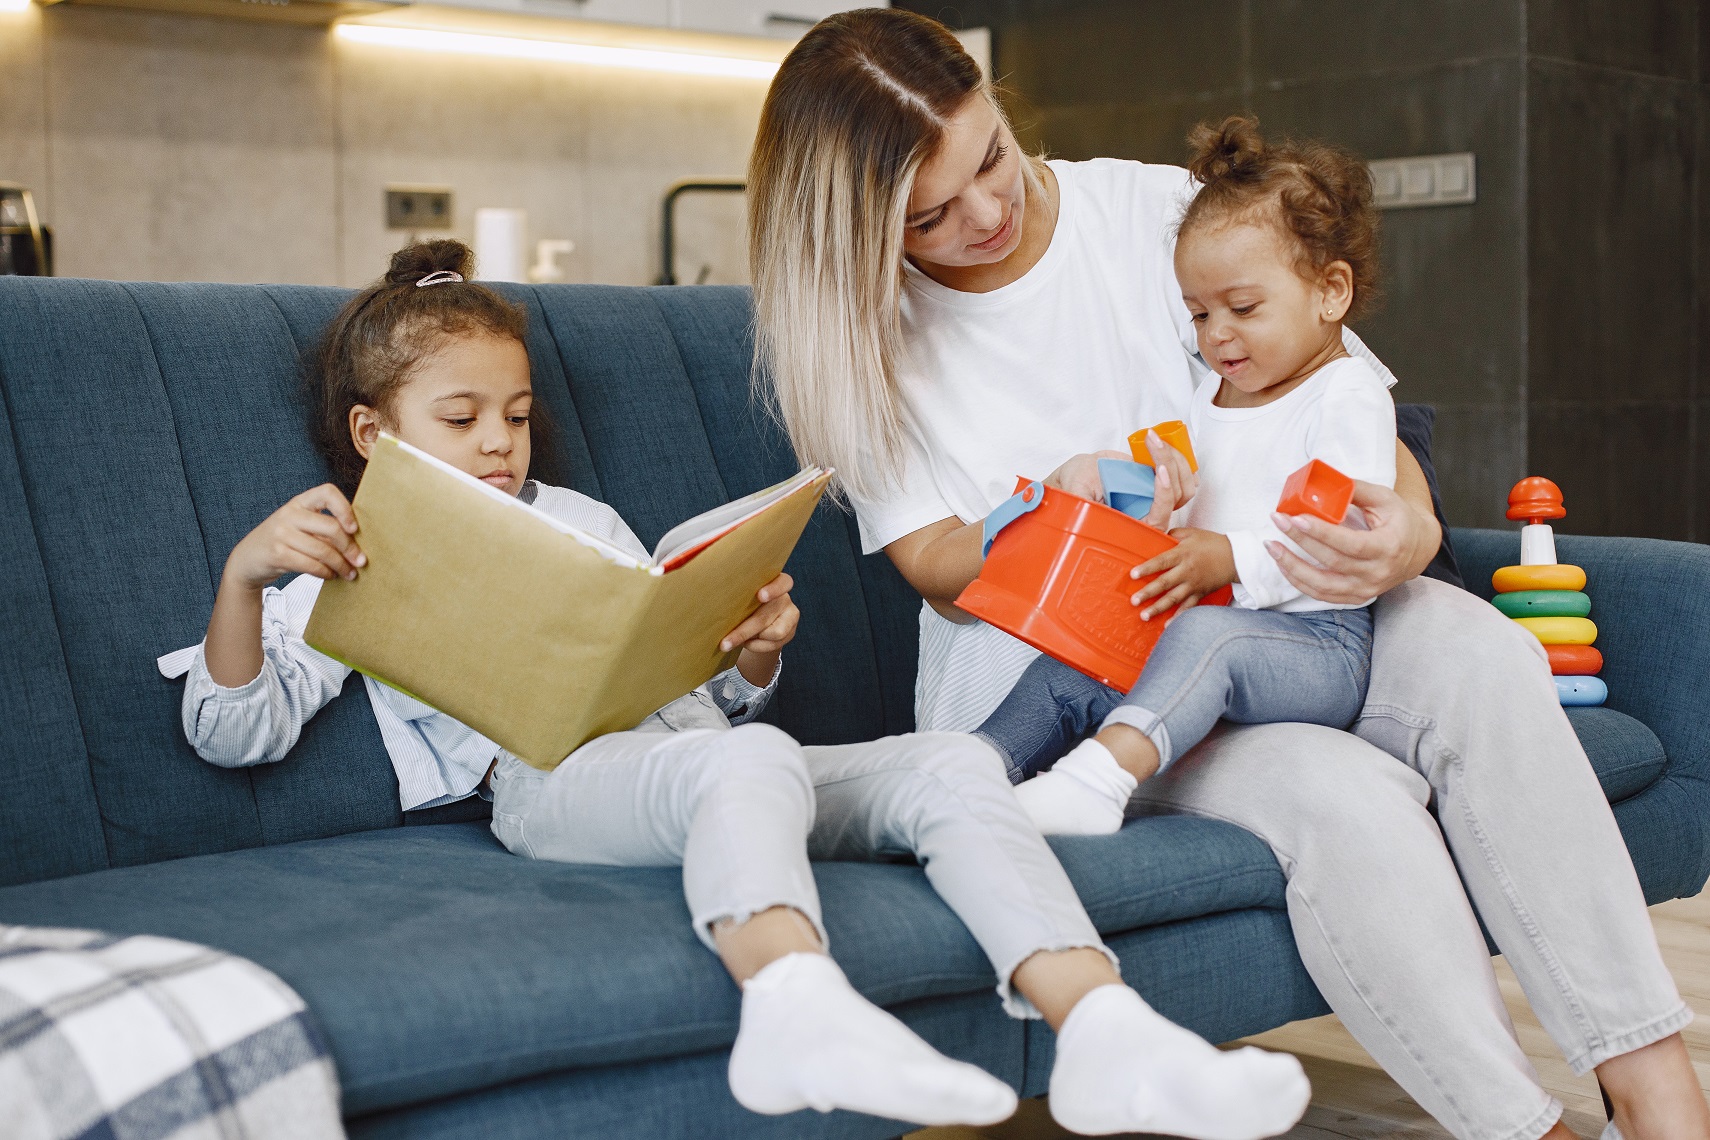 Mother and children relaxing together on the sofa at home in the living room. Little girls reading a book and play toys.